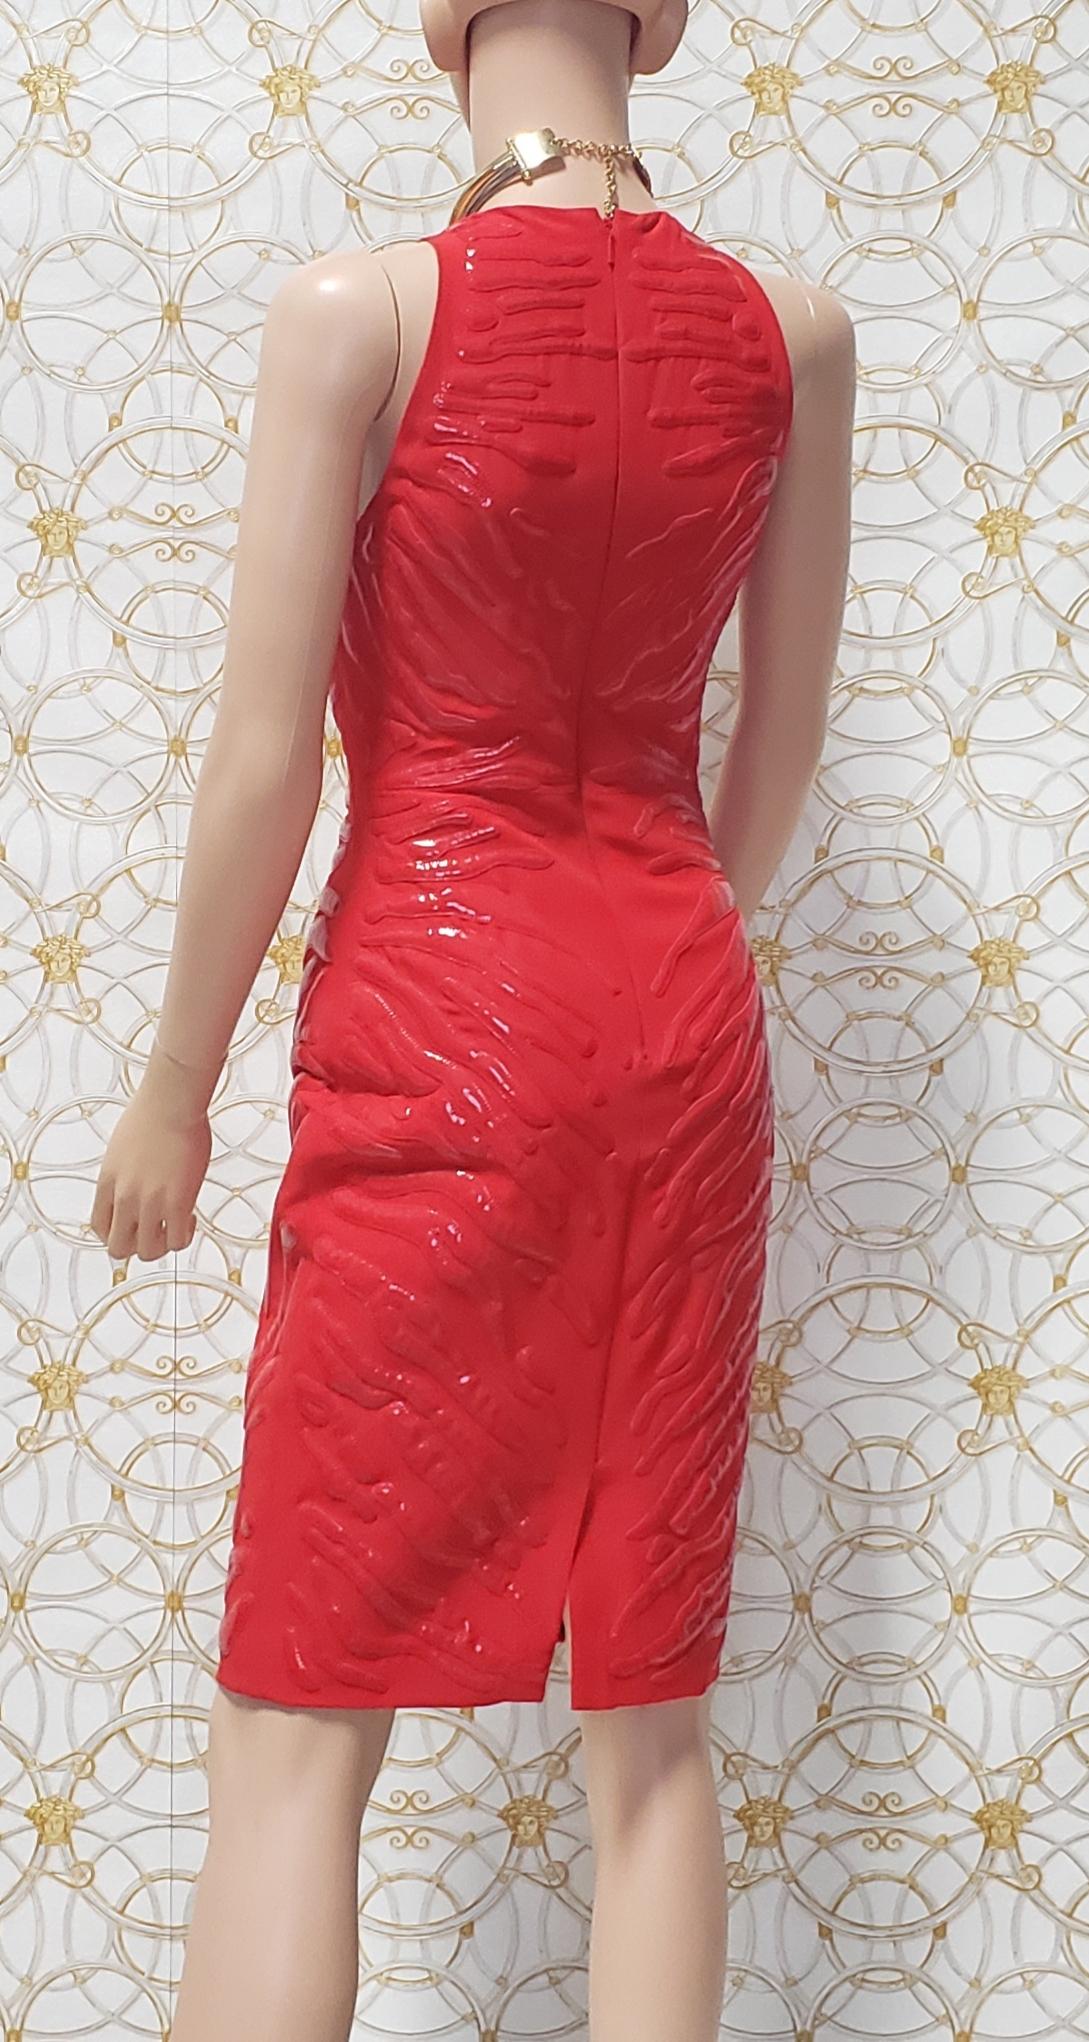 Versace Red Crepe Cady Sheath Dress With Vinyl Animal Stripes 40 - 4/6 For Sale 2